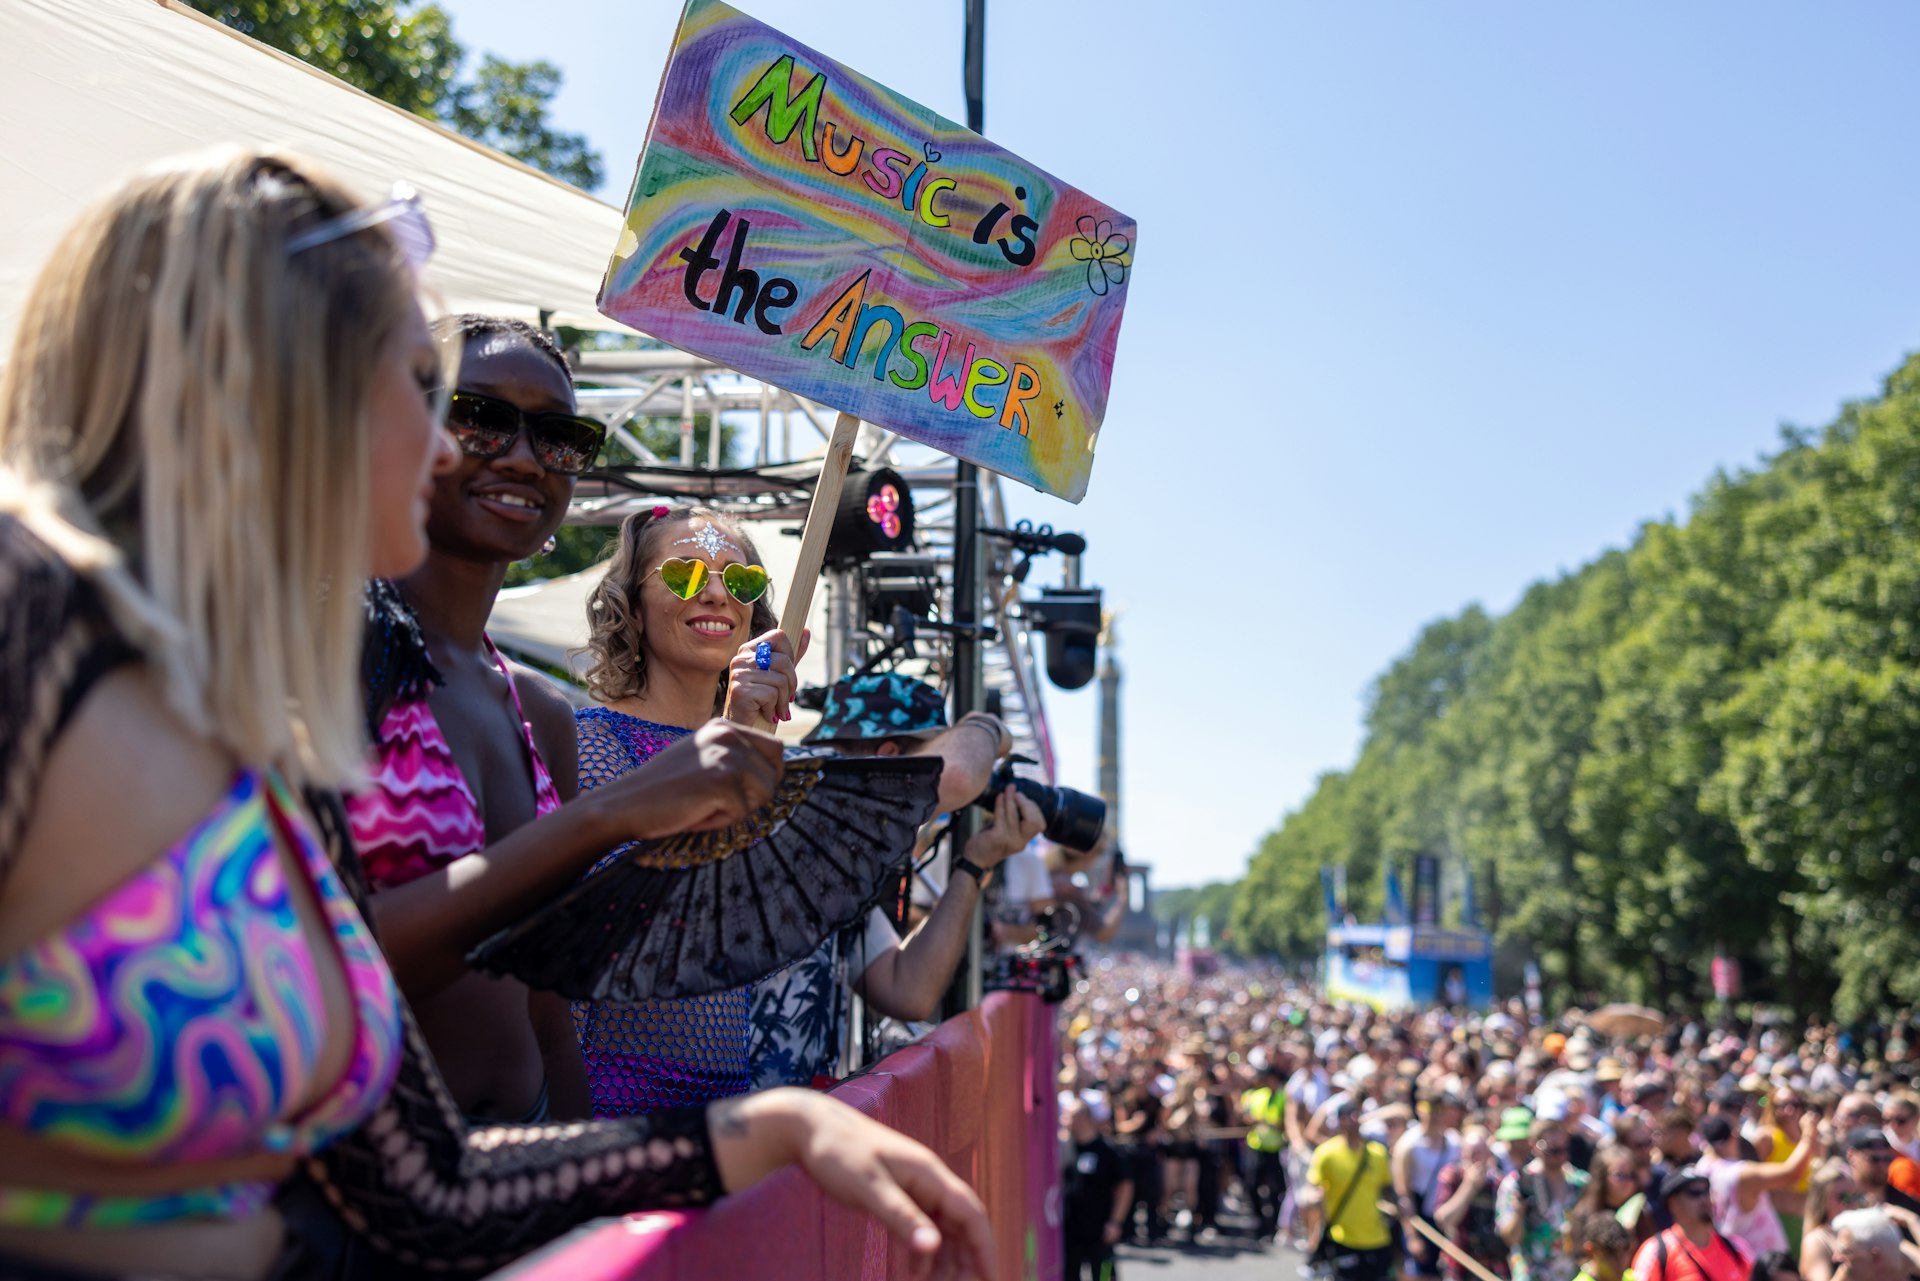  music enthusiasts dance during the Rave the Planet parade in Tiergarten park, Berlin, Germany